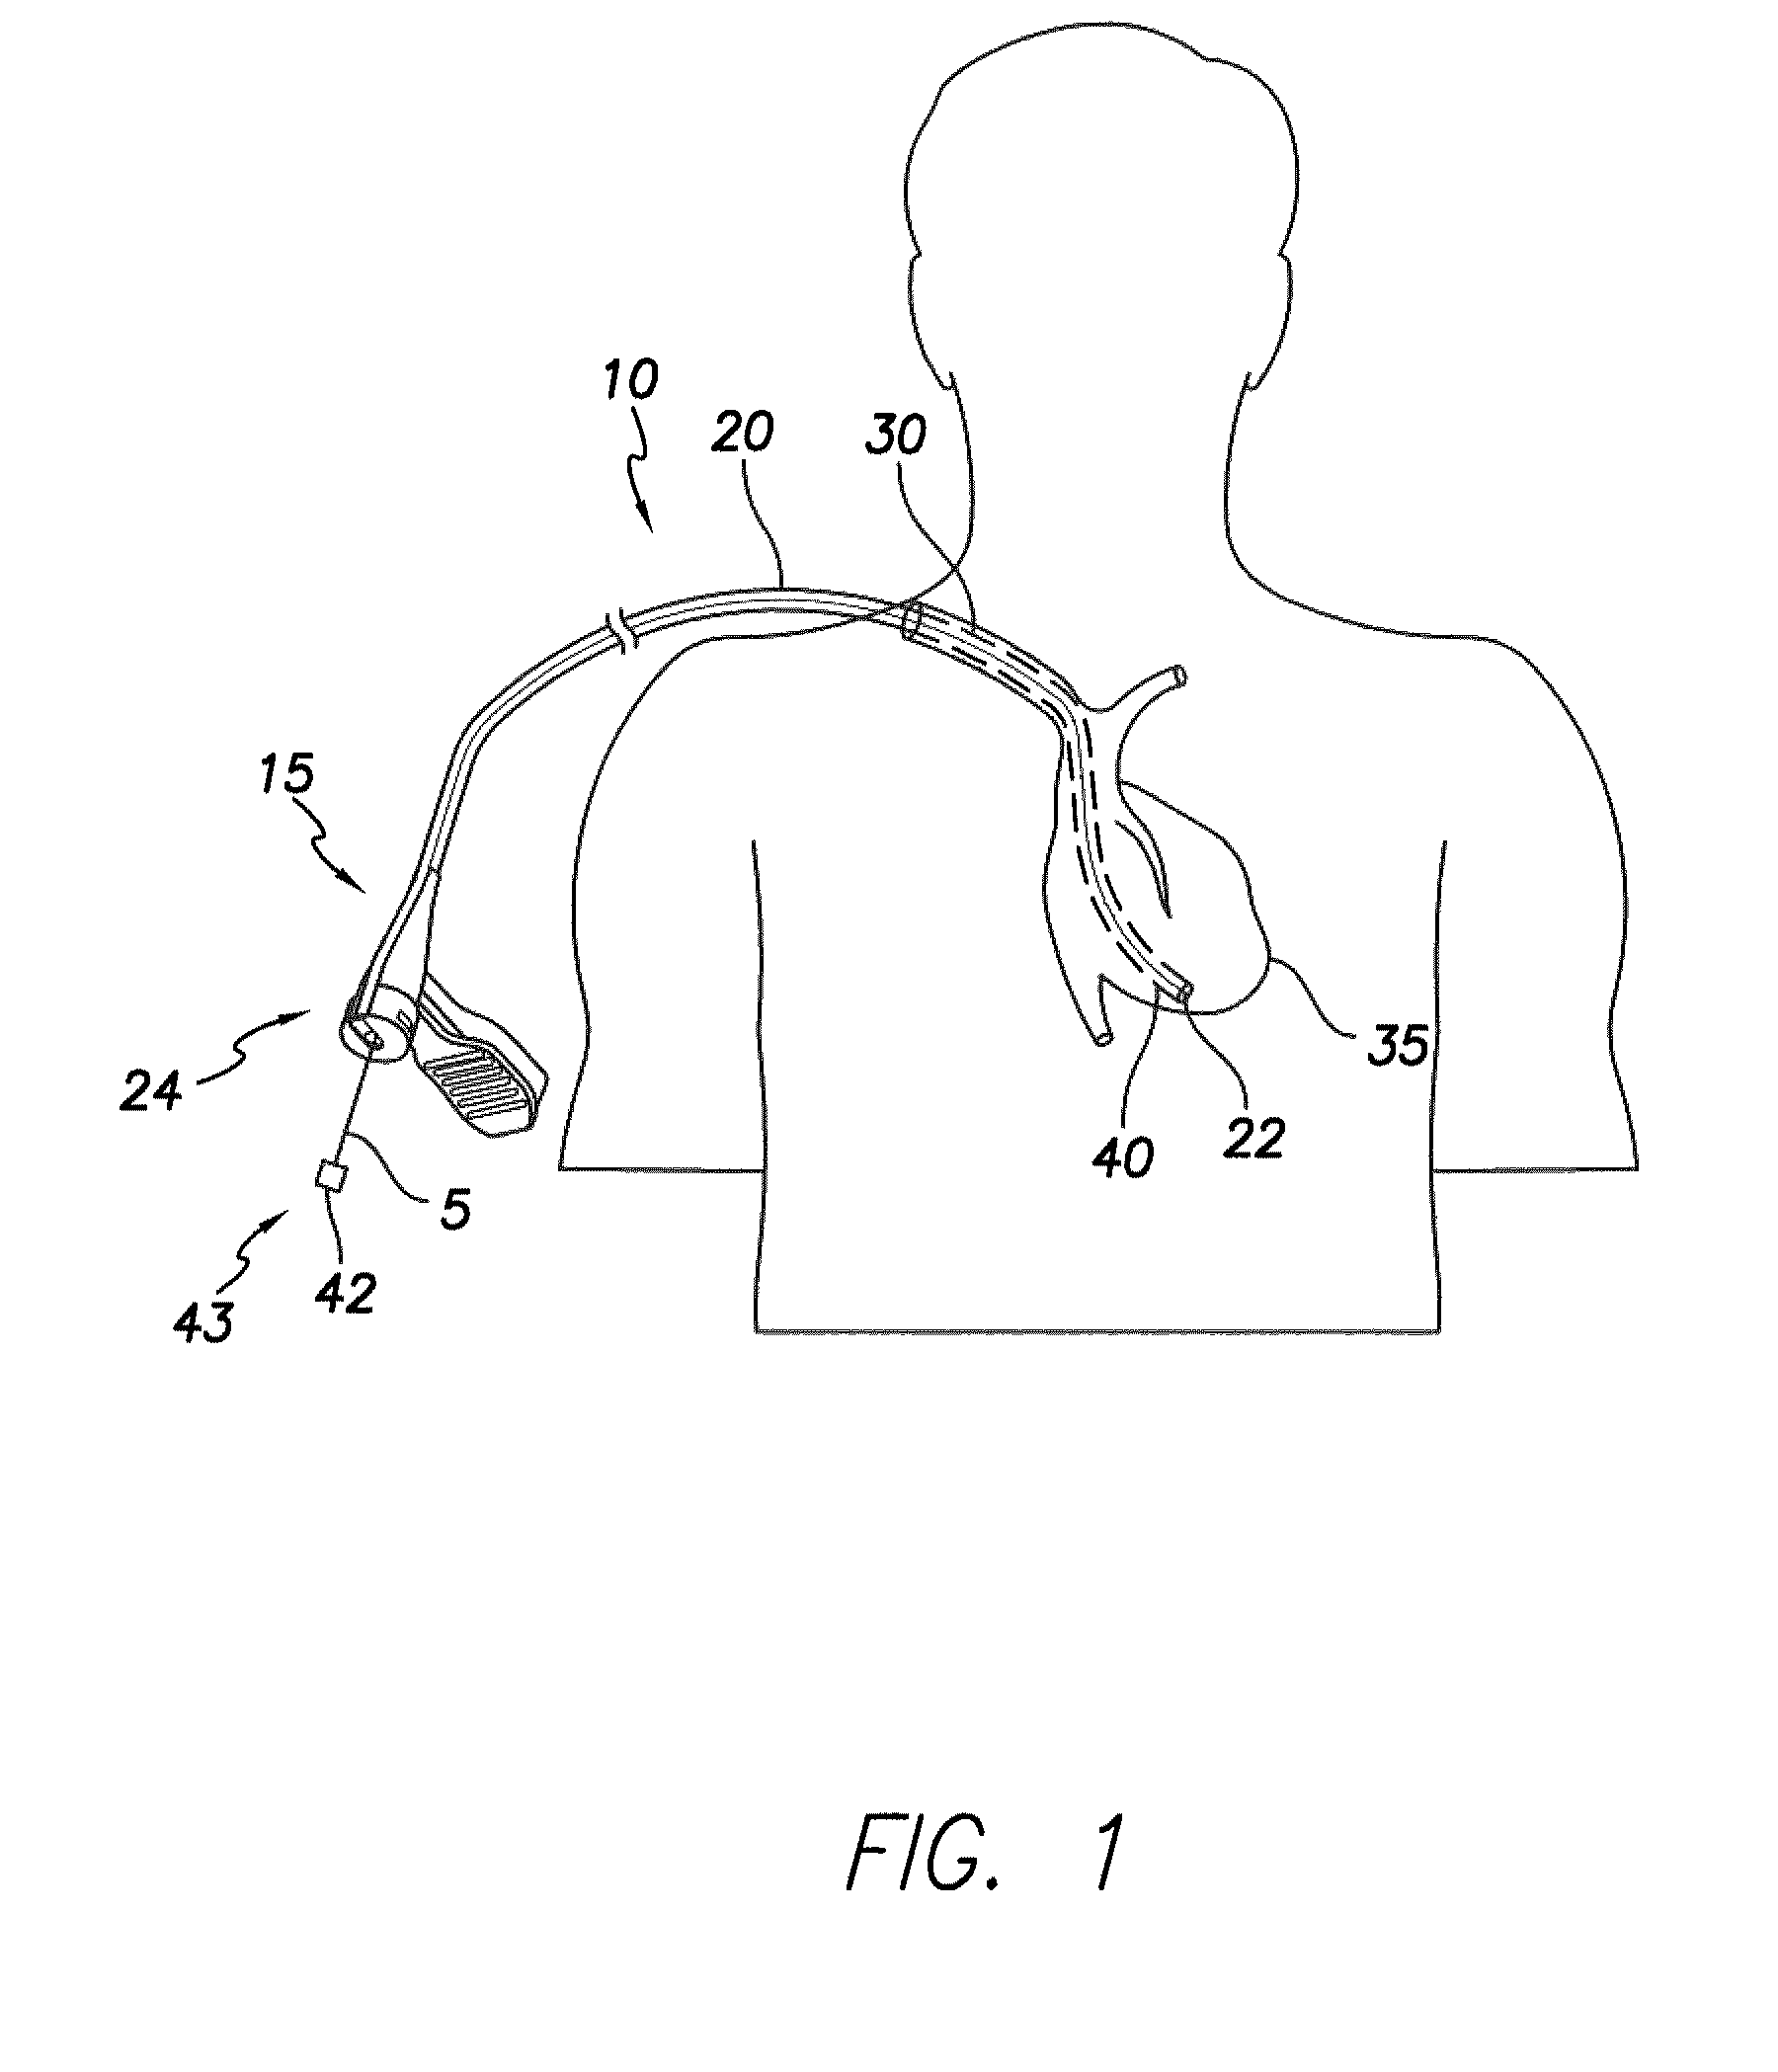 Slittable delivery device assembly for the delivery of a cardiac surgical device